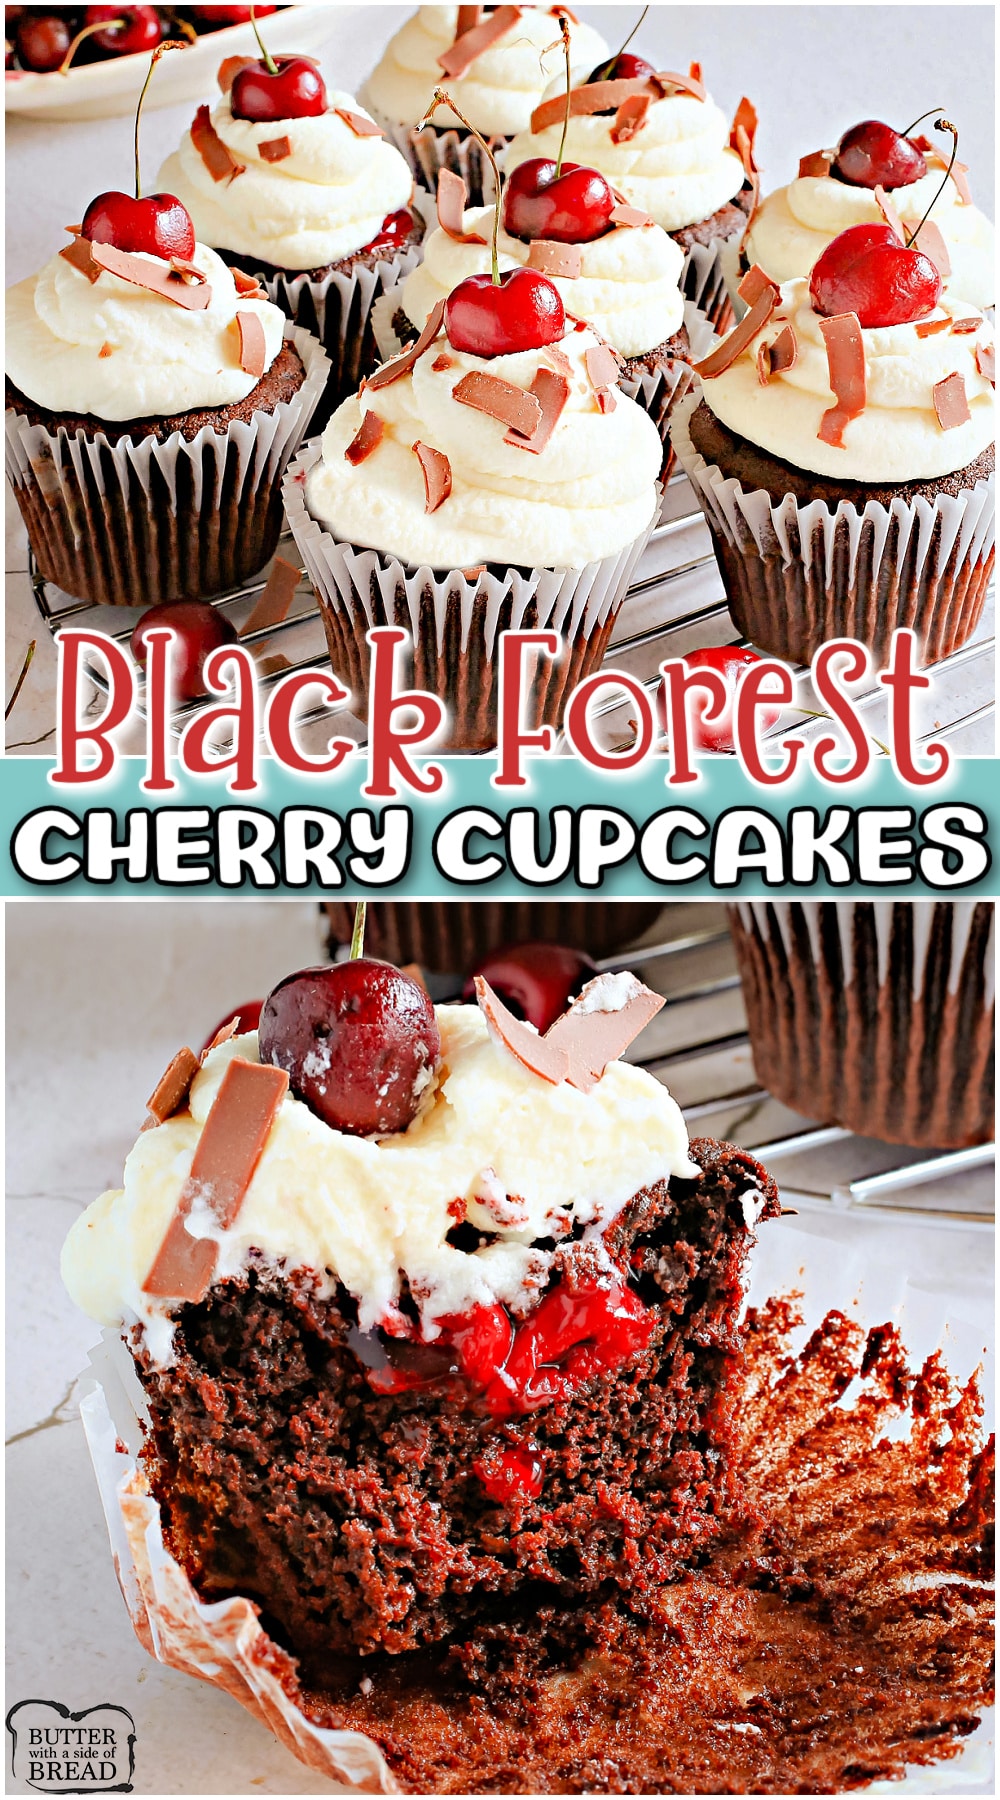 Black Forest Cupcakes with homemade chocolate cake, sensational cherry filling & topped with fresh sweet cream! Our from-scratch cherry cupcake recipe is guaranteed to be a delight!